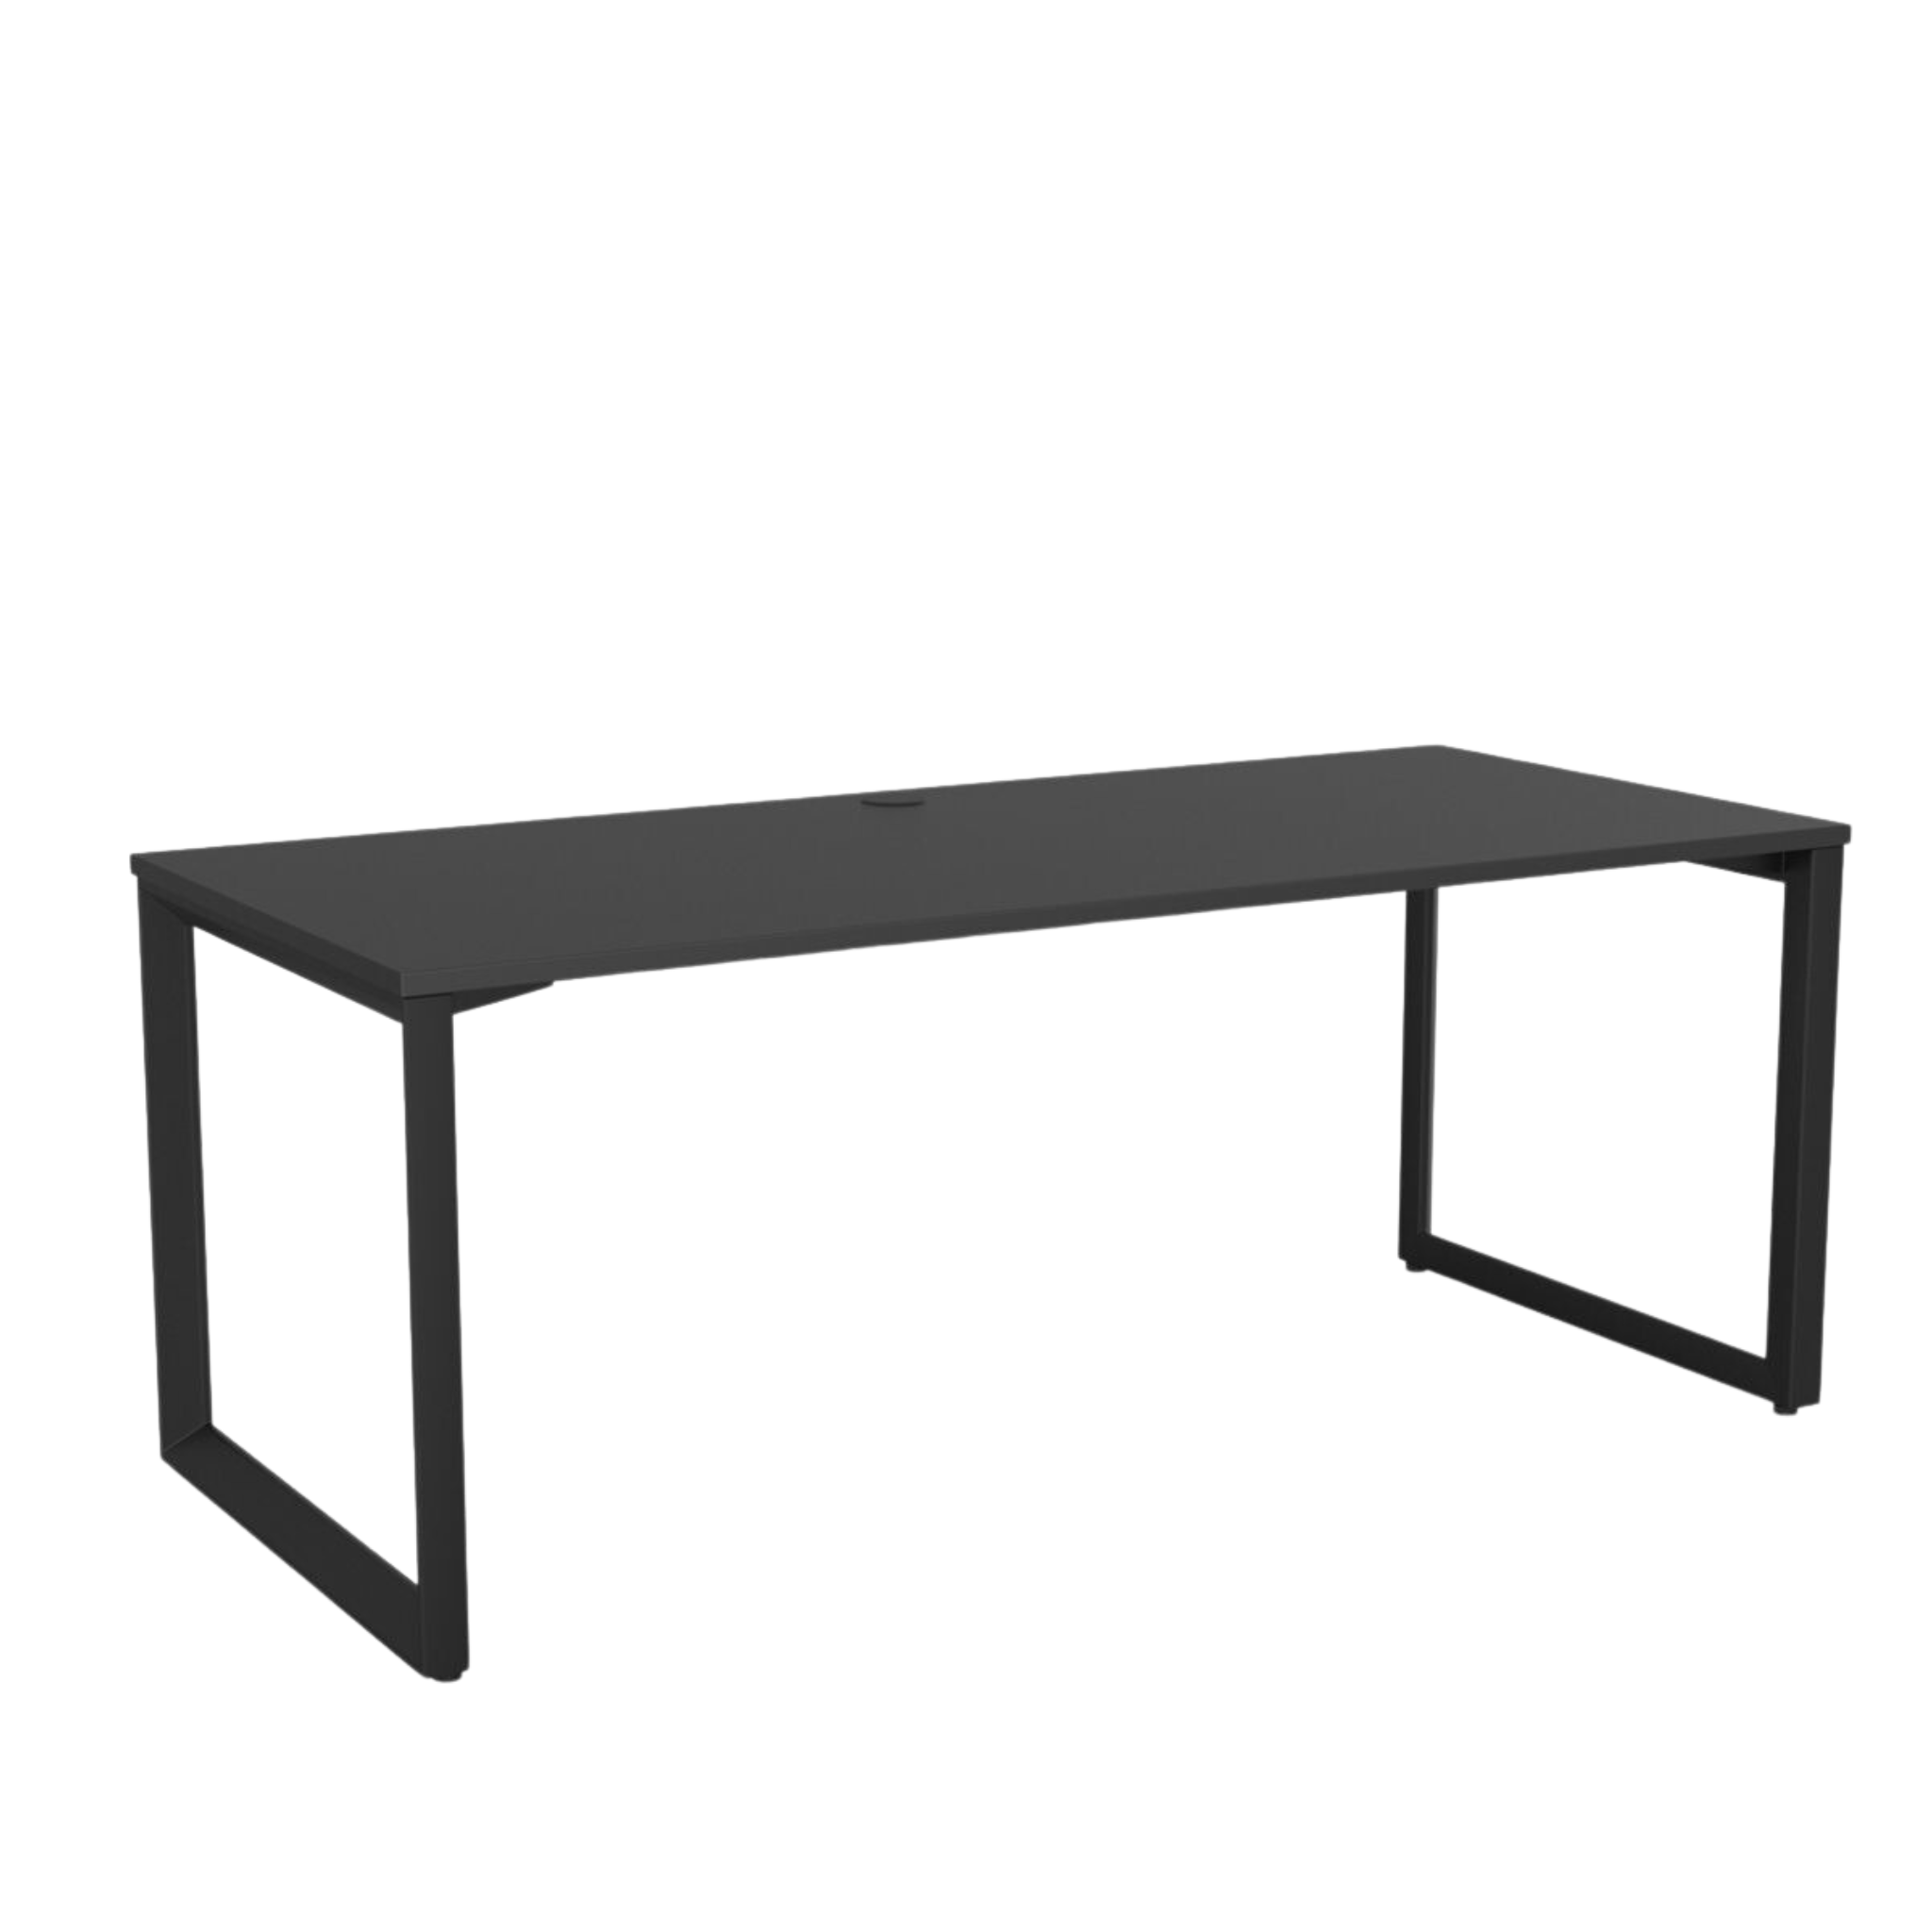 Anvil fixed height desk with black metal frame and black melteca top